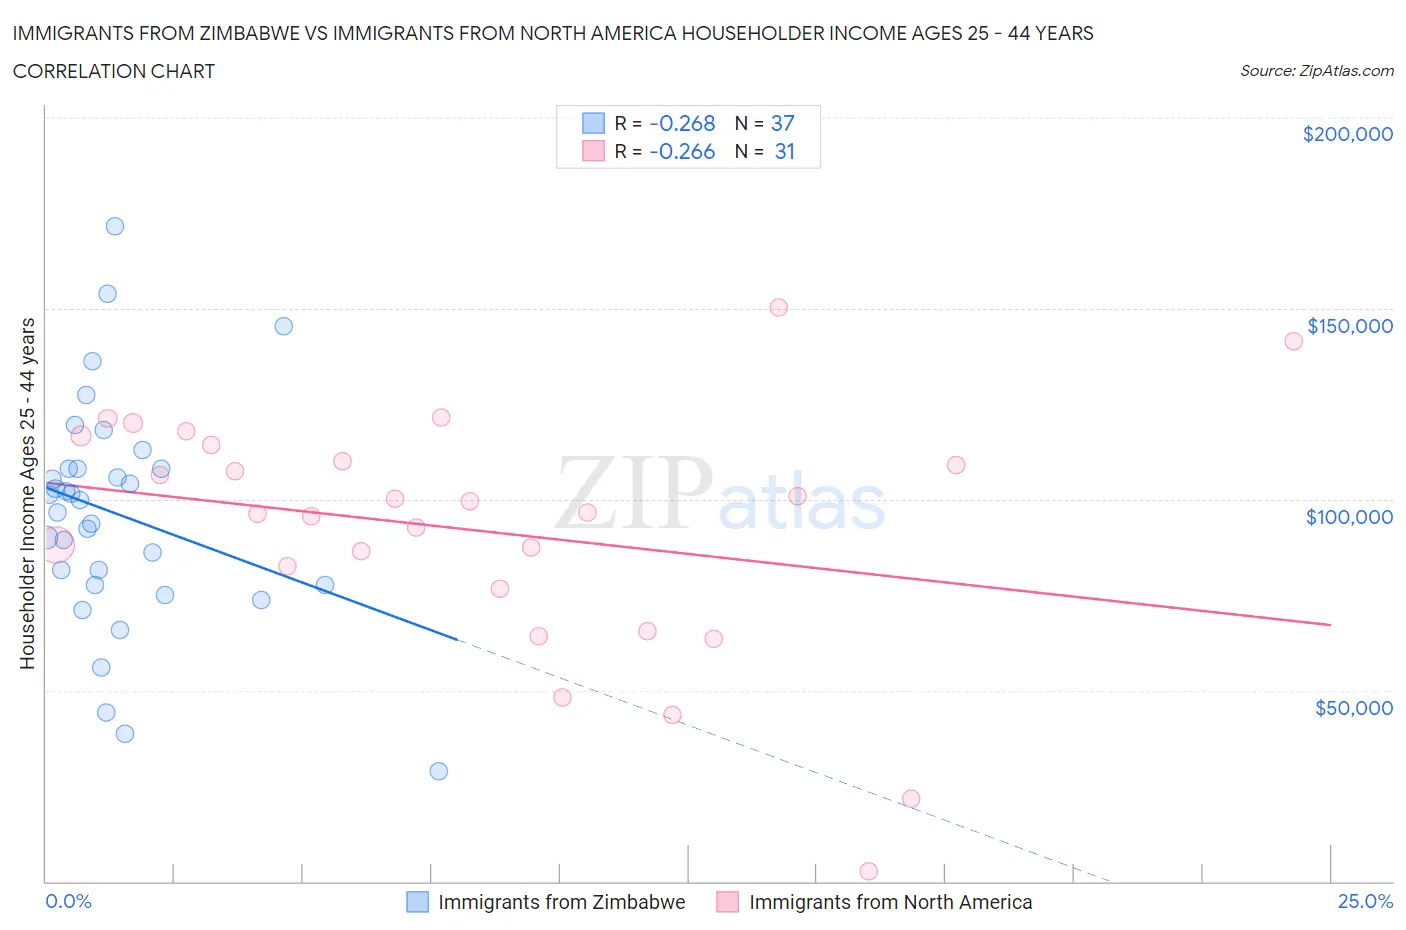 Immigrants from Zimbabwe vs Immigrants from North America Householder Income Ages 25 - 44 years